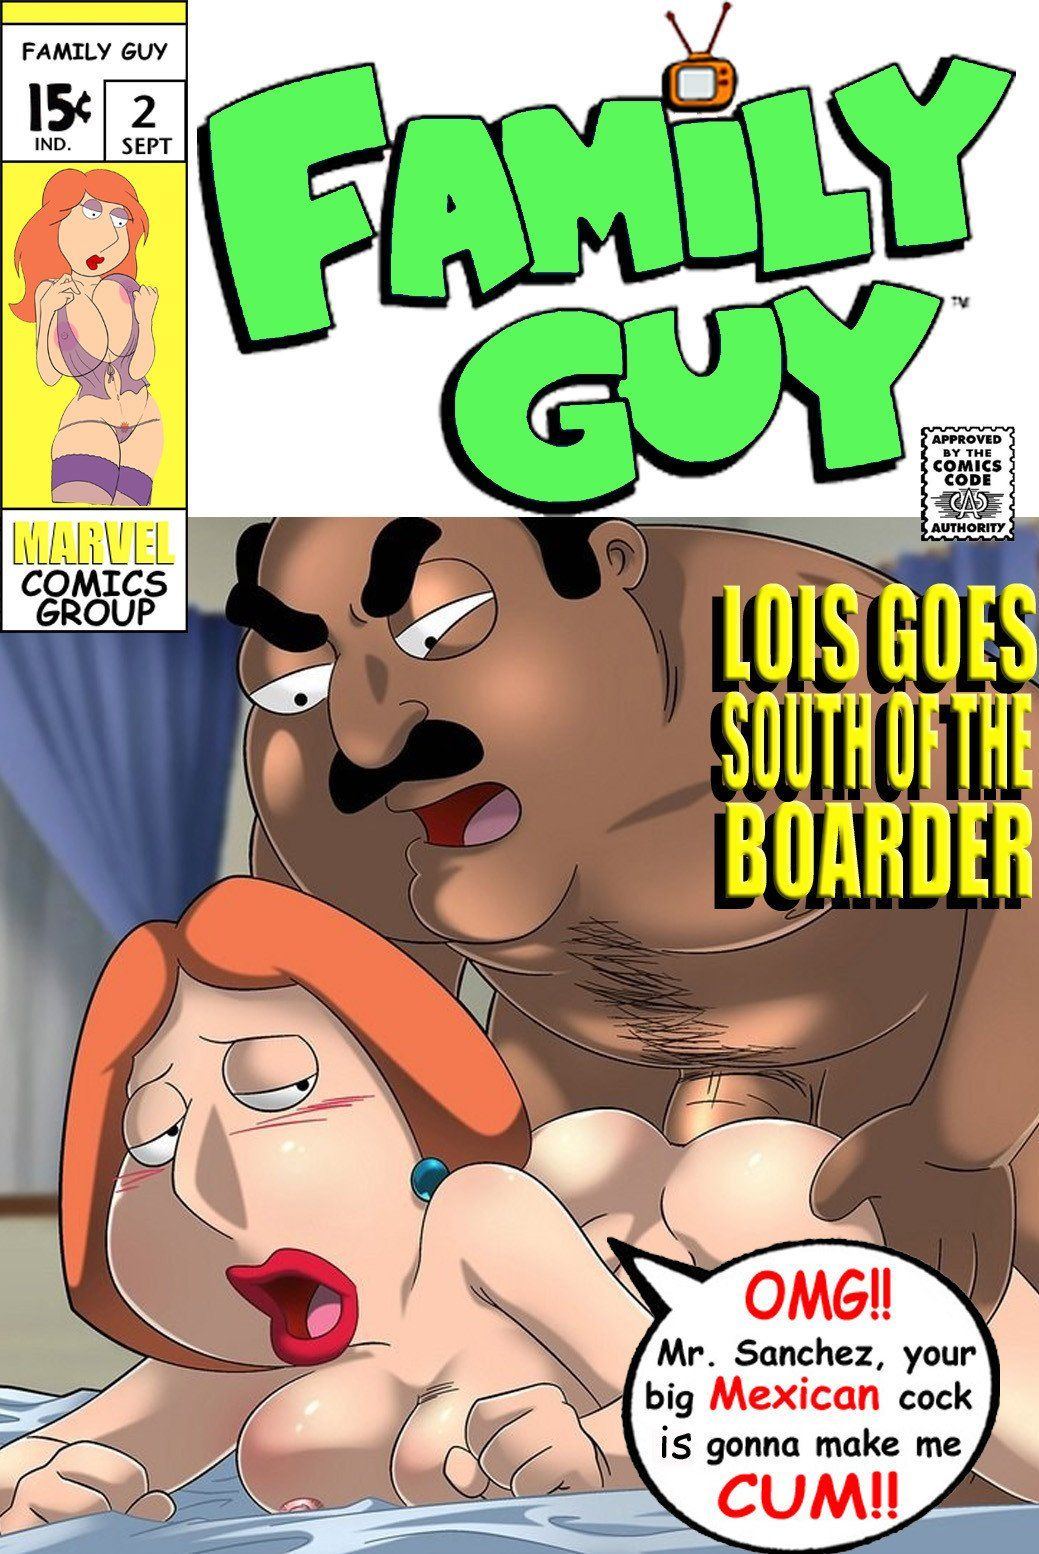 Mexican lady from family guy Sexy Full HD images 100% free. photo pic